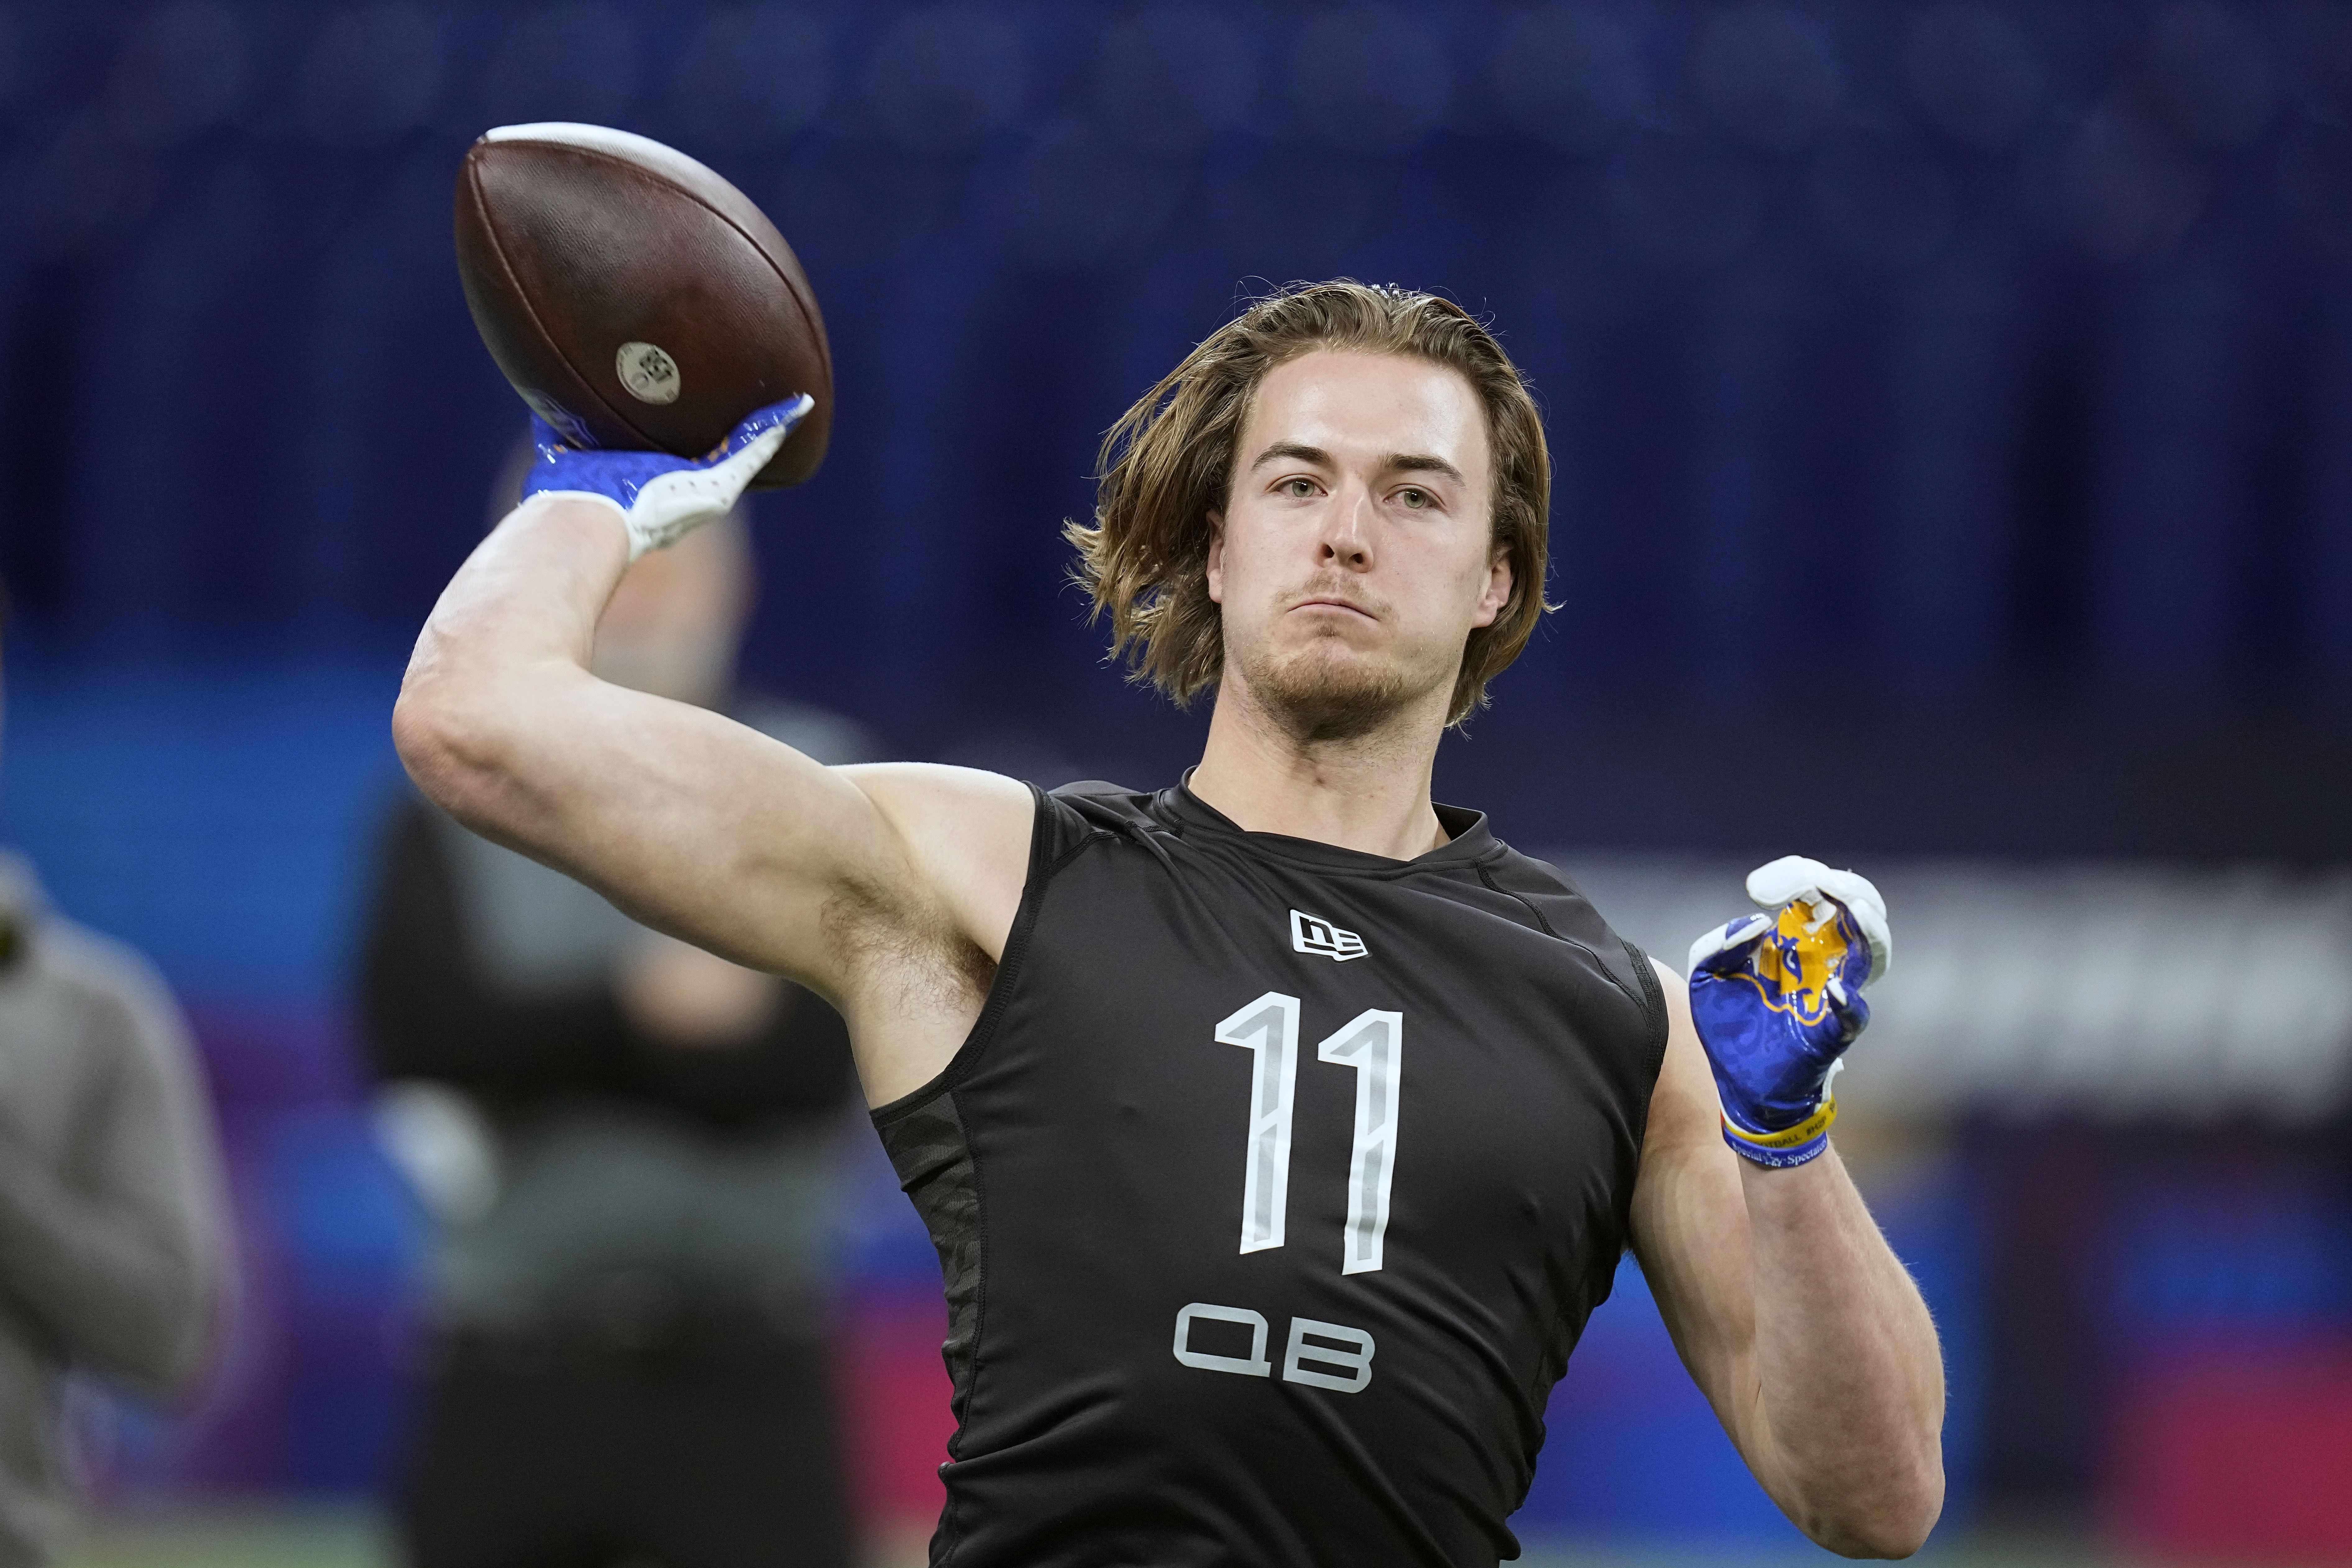 \ud83c\udfa5 Watch highlights from Day 2 of 2023 NFL Combine